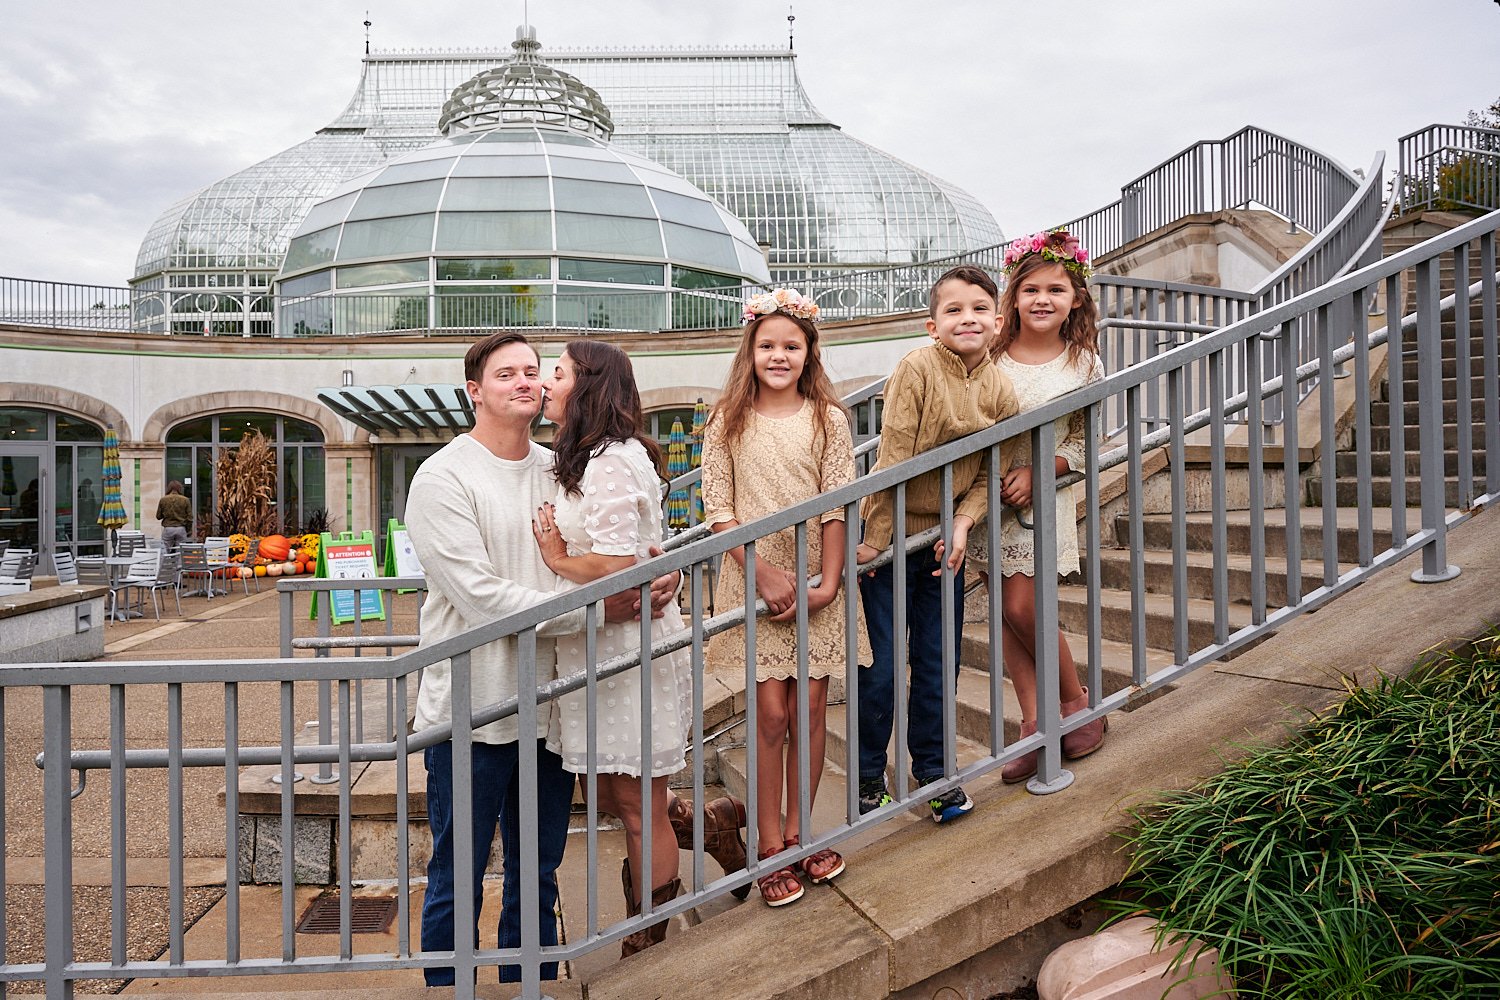  Zack Reed is posing with his wife, son and two daughters in front of Phipps Conservatory and Botanical Gardens of Pittsburgh, Pennsylvania. The ladies are wearing embroidered beige dresses and flowers 